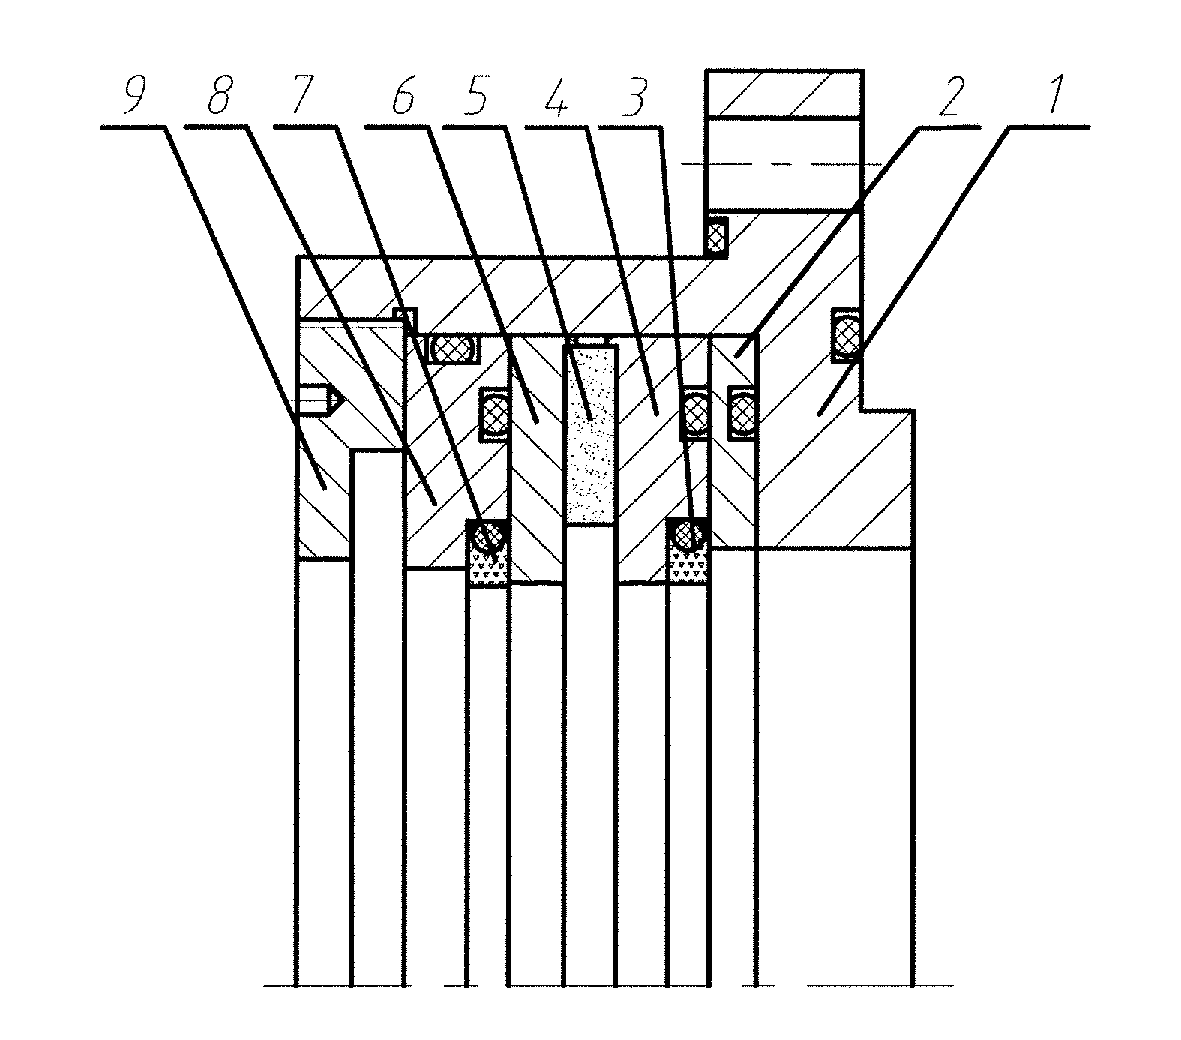 Reciprocating shaft's sealing device with both magnetic fluid seal and c-type slip ring seal